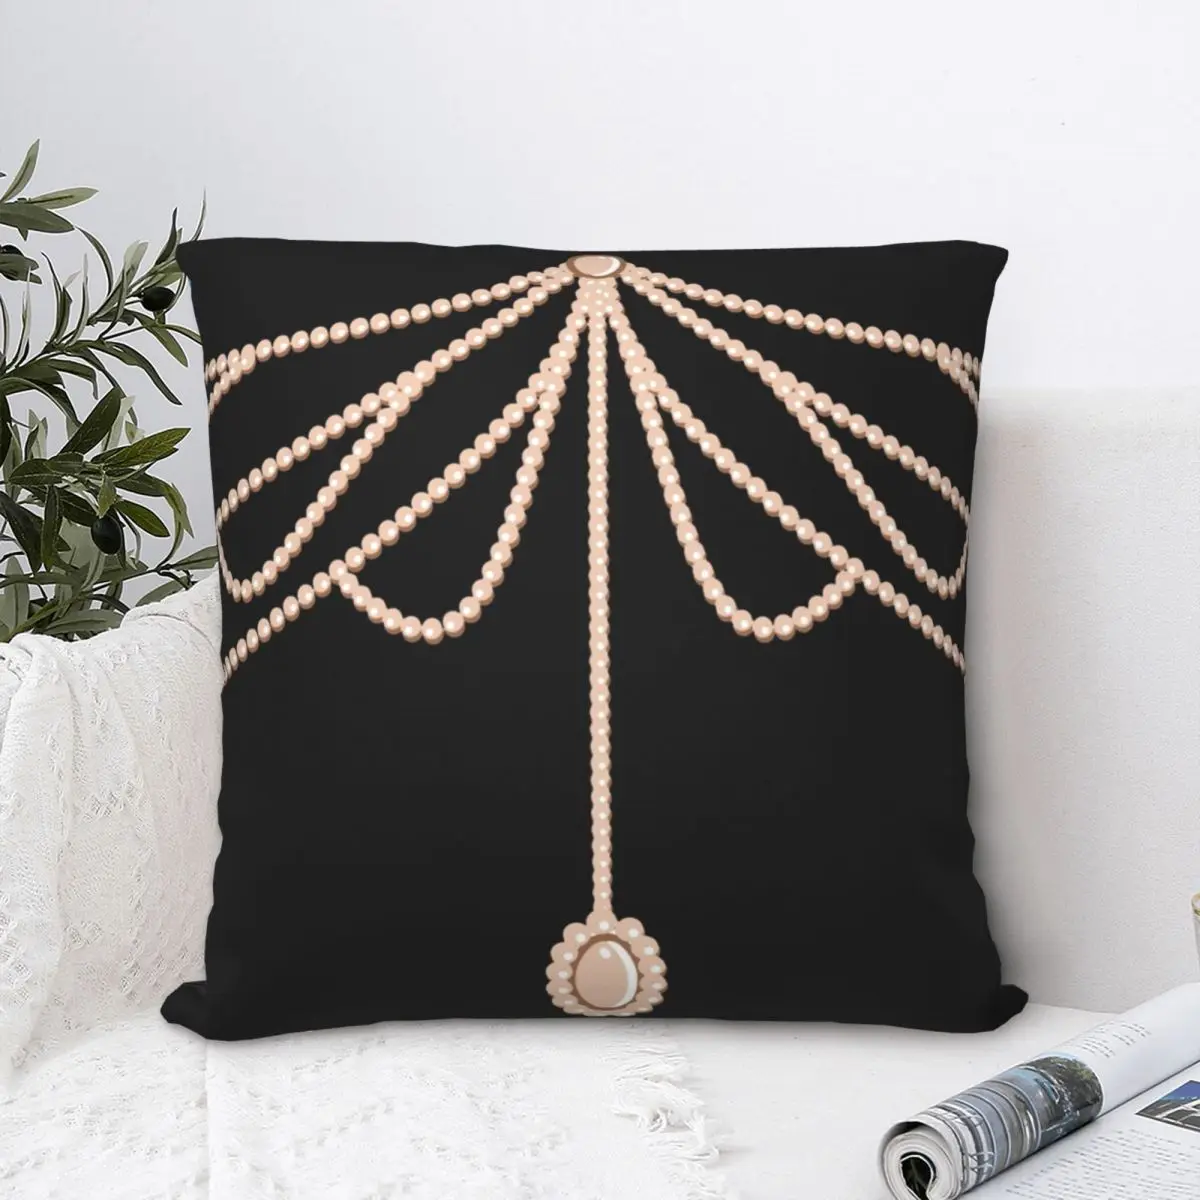 

Elegant Glamour Pearl Necklace Decoration Square Pillowcase Cover funny Zip Home Decorative Polyester Throw Pillow Case for Car